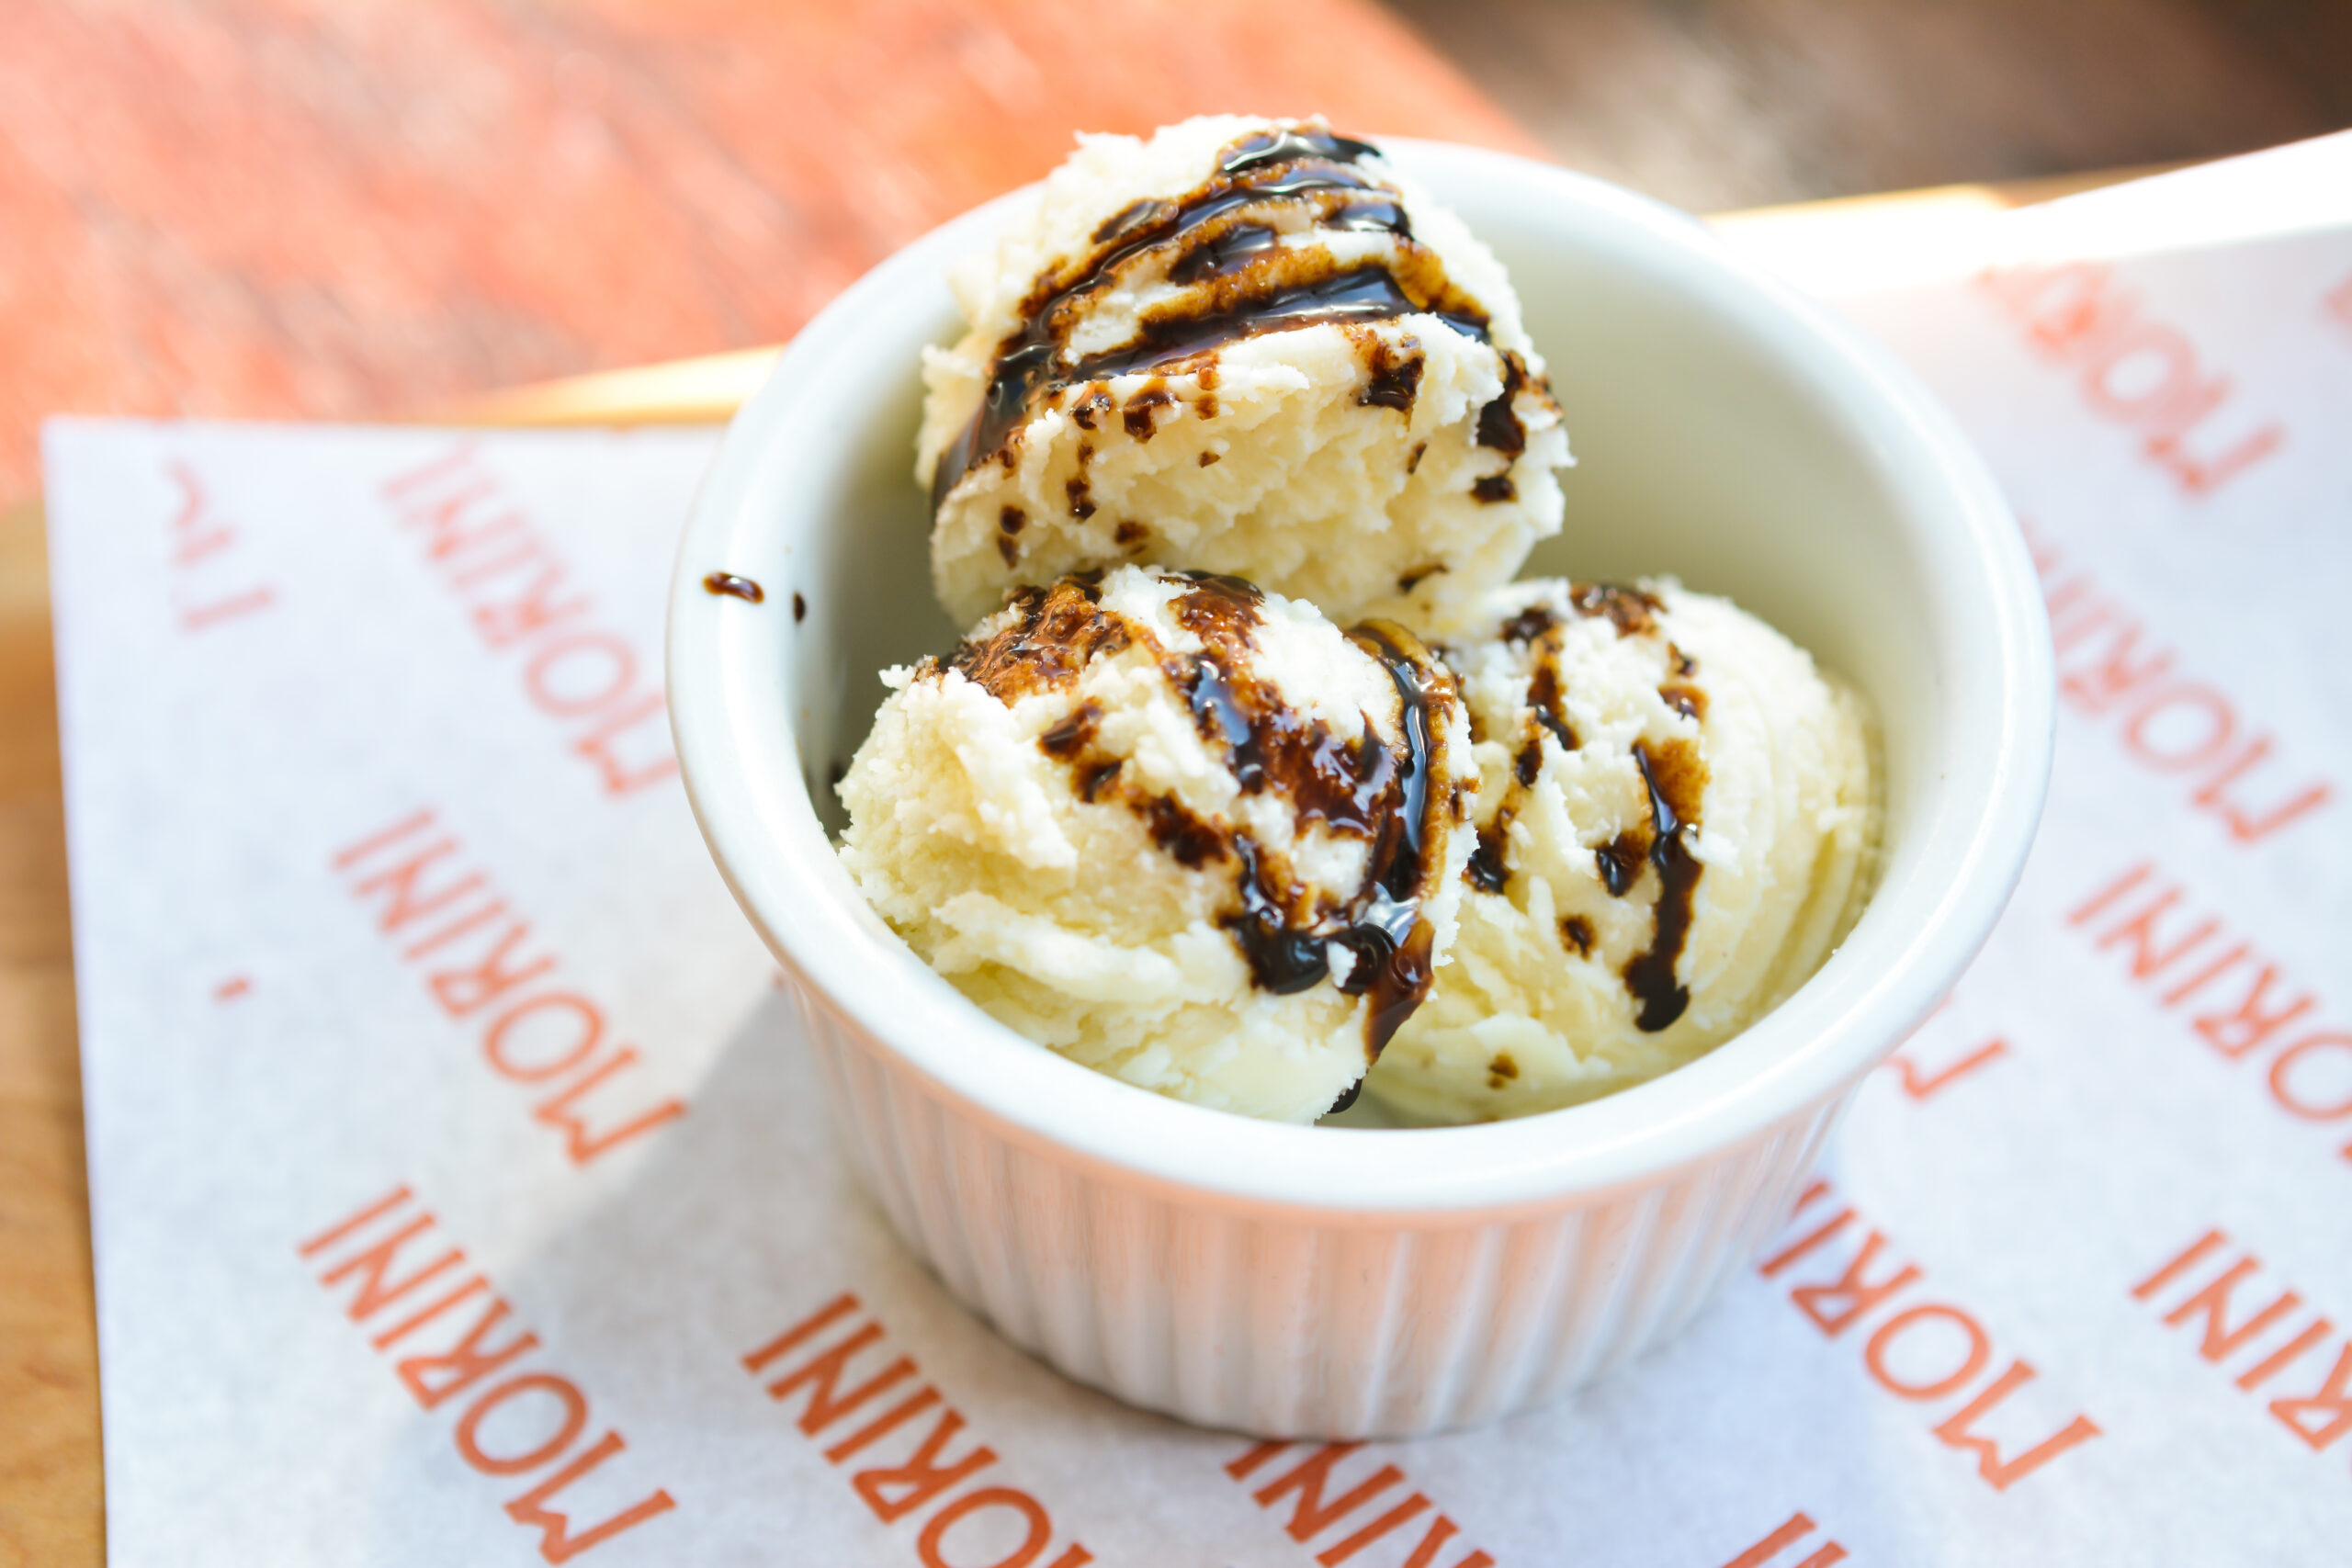 whipped parm in a dish, scooped and drizzled with balsamic to look like gelato